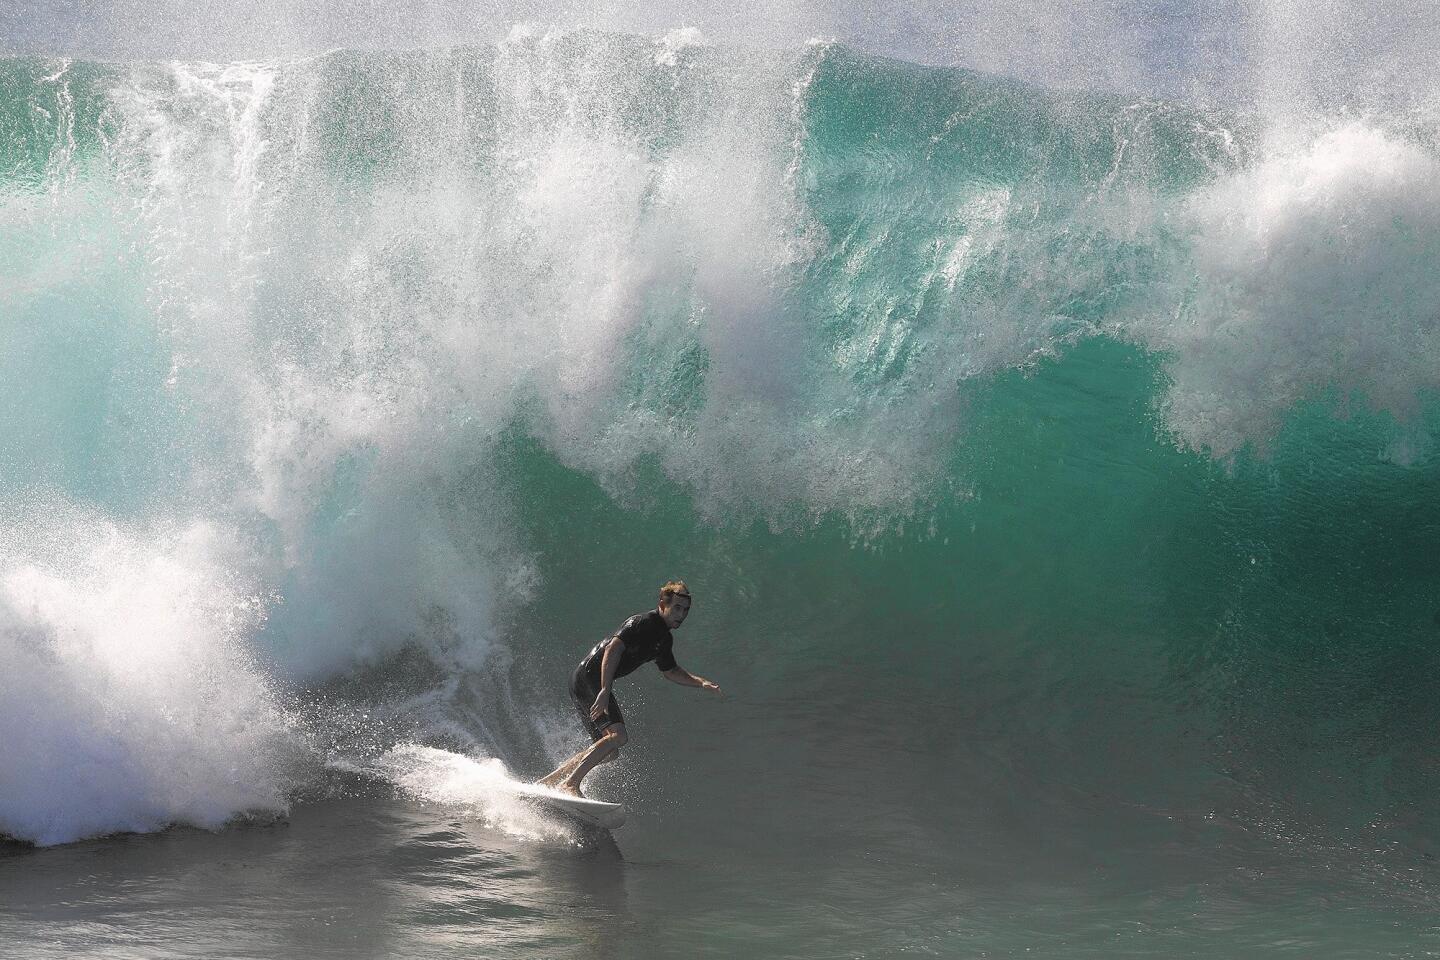 A surfer catches a wave at the Wedge on Tuesday morning in Newport Beach.